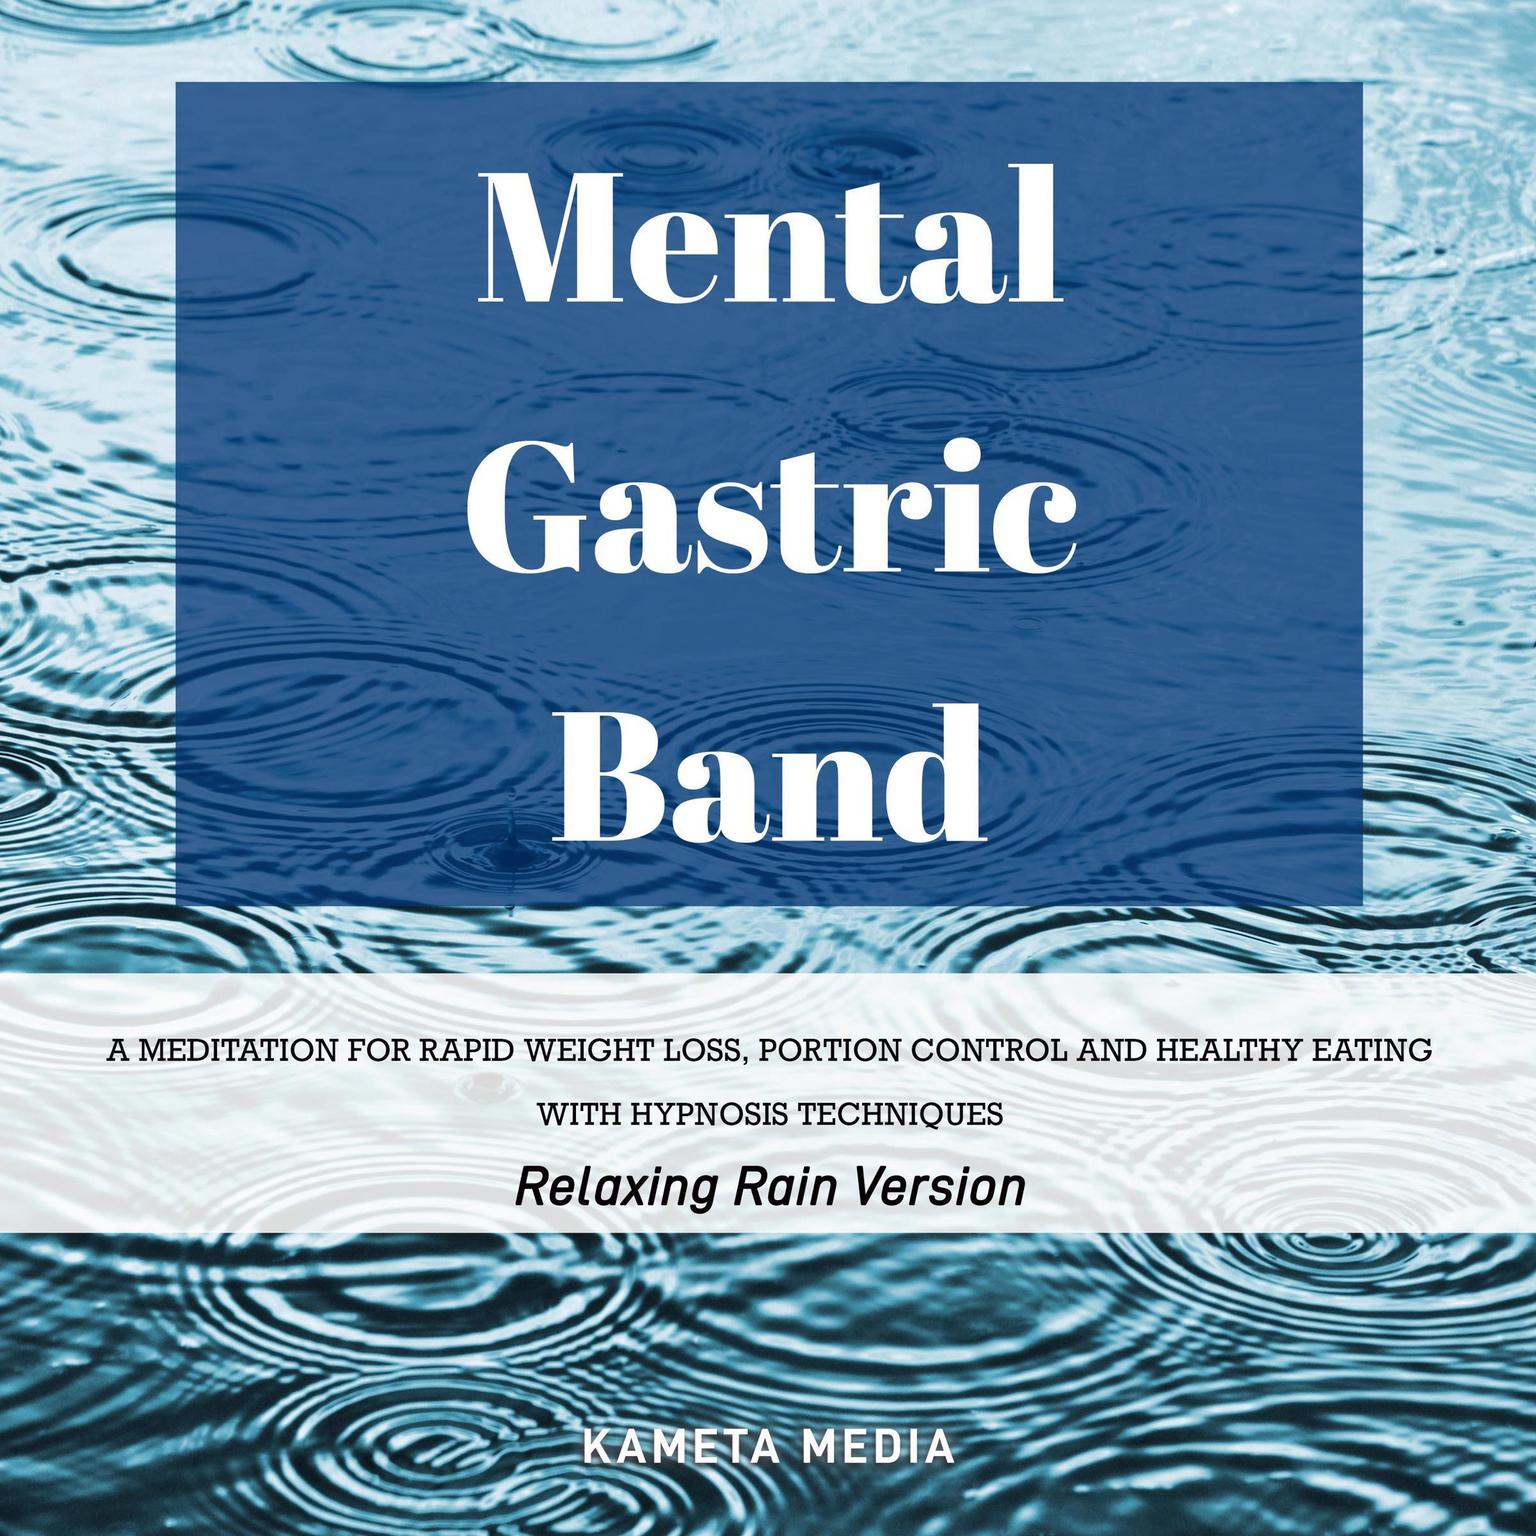 Mental Gastric Band: A Meditation for Rapid Weight Loss, Portion Control and Healthy Eating with Hypnosis Techniques (Relaxing Rain Version) Audiobook, by Kameta Media